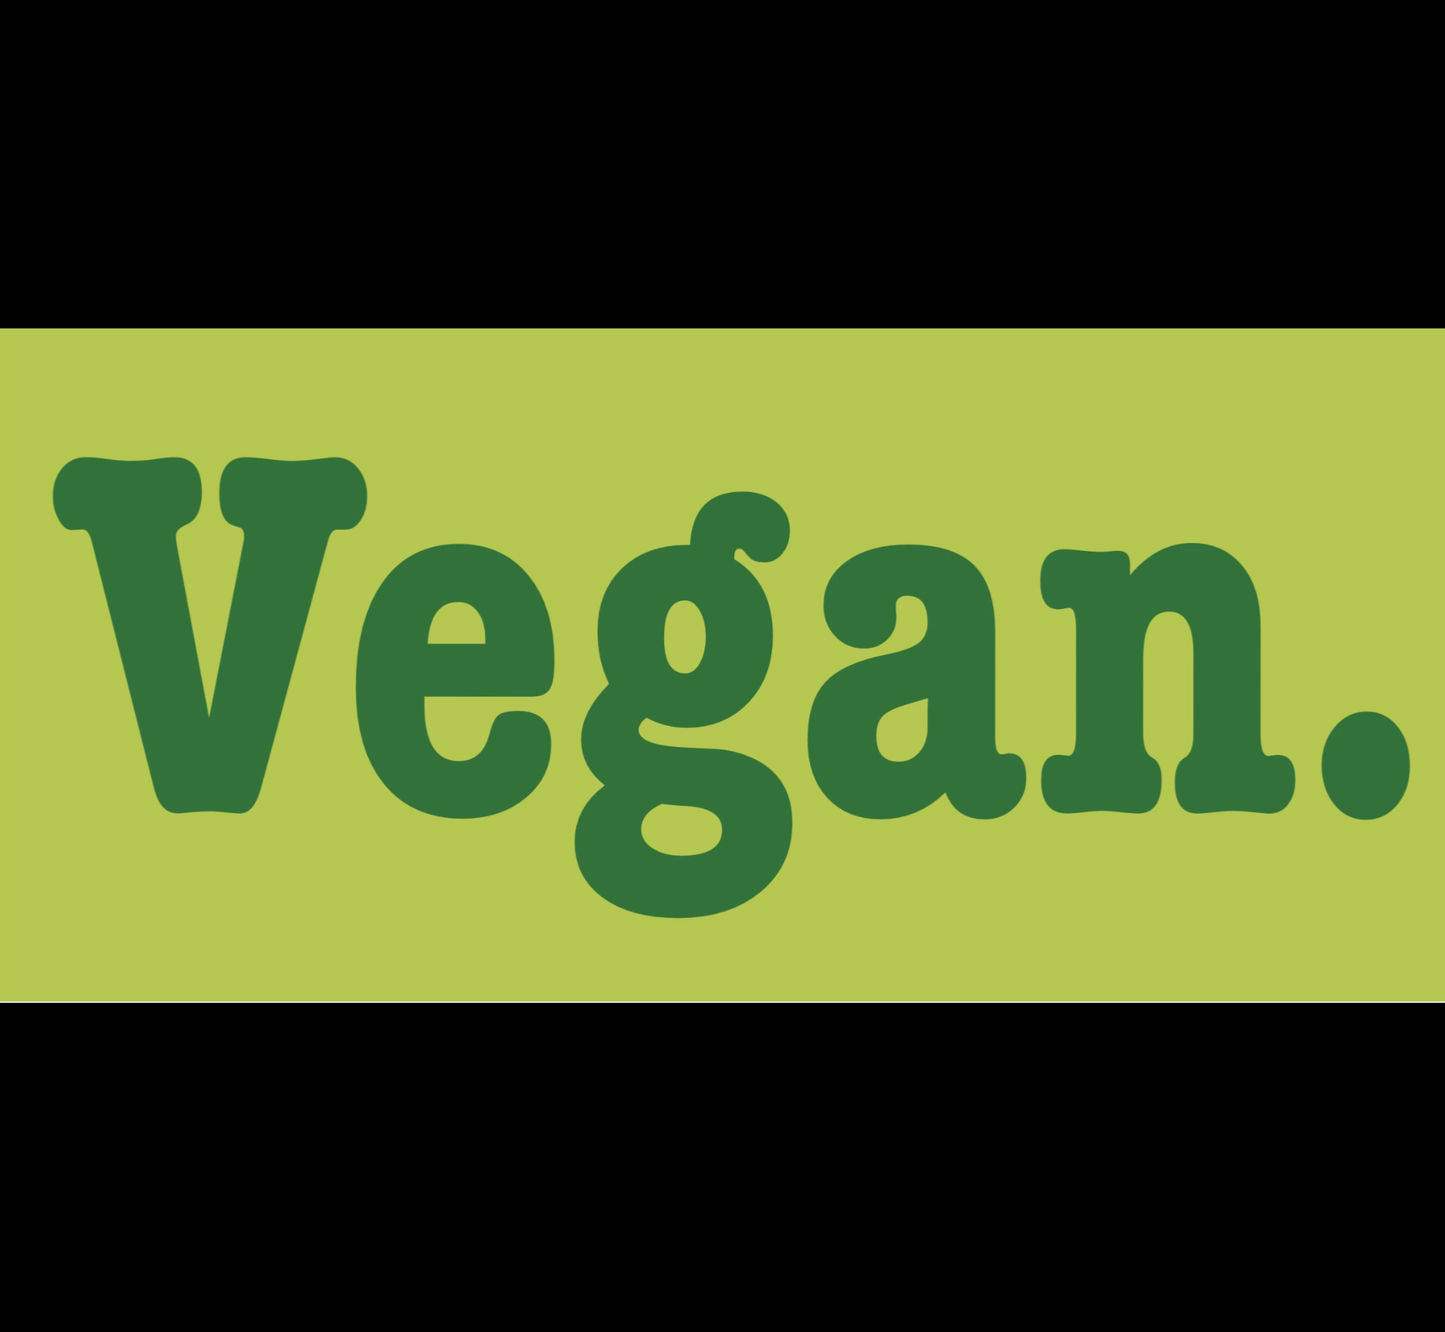 This is a very simple design that just says the word vegan with a period after it and a V and its green background with green lettering the background is a yellow a green. The letters are springy green.